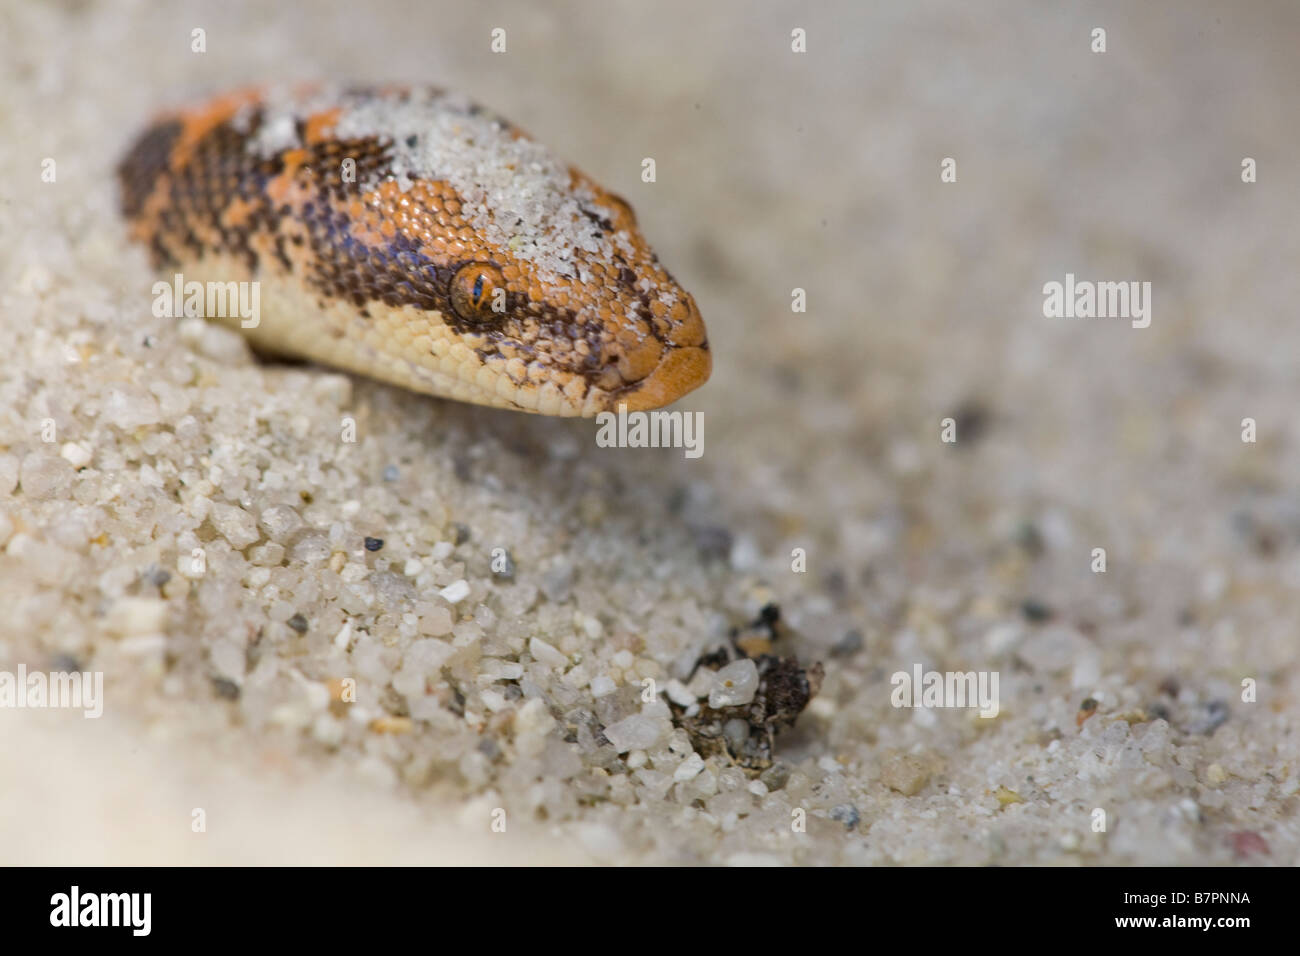 A captive Kenyan Sand Boa, Gongylophis colubrinus, hides in a sand bed in Montecito, California, United States of America Stock Photo